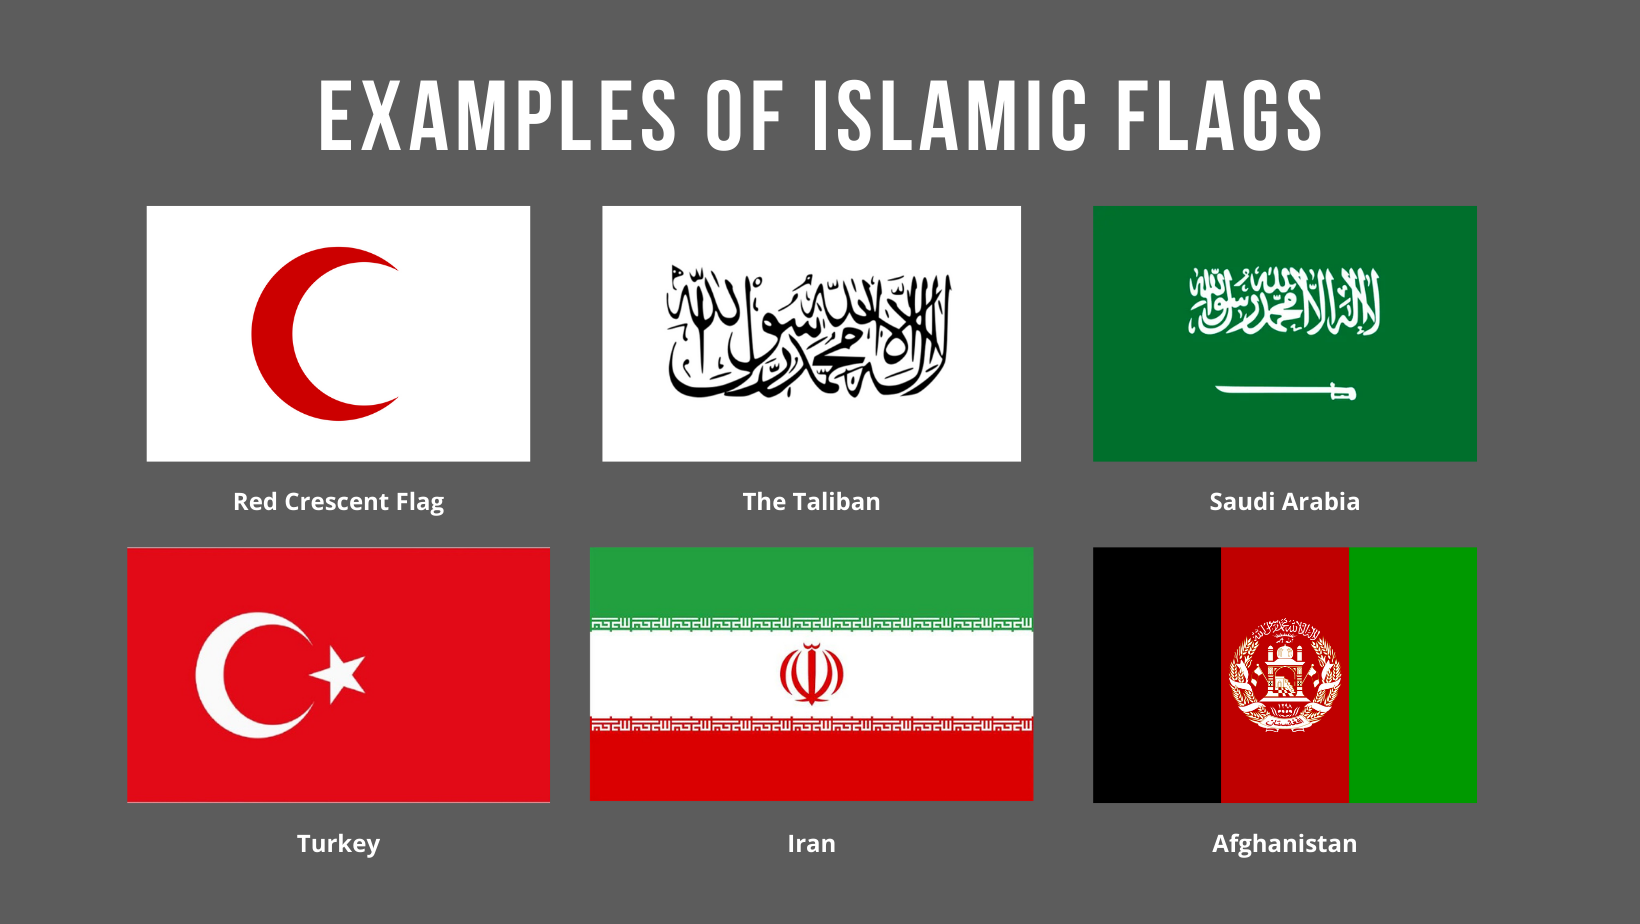 6 examples of flags with Islamic symbols